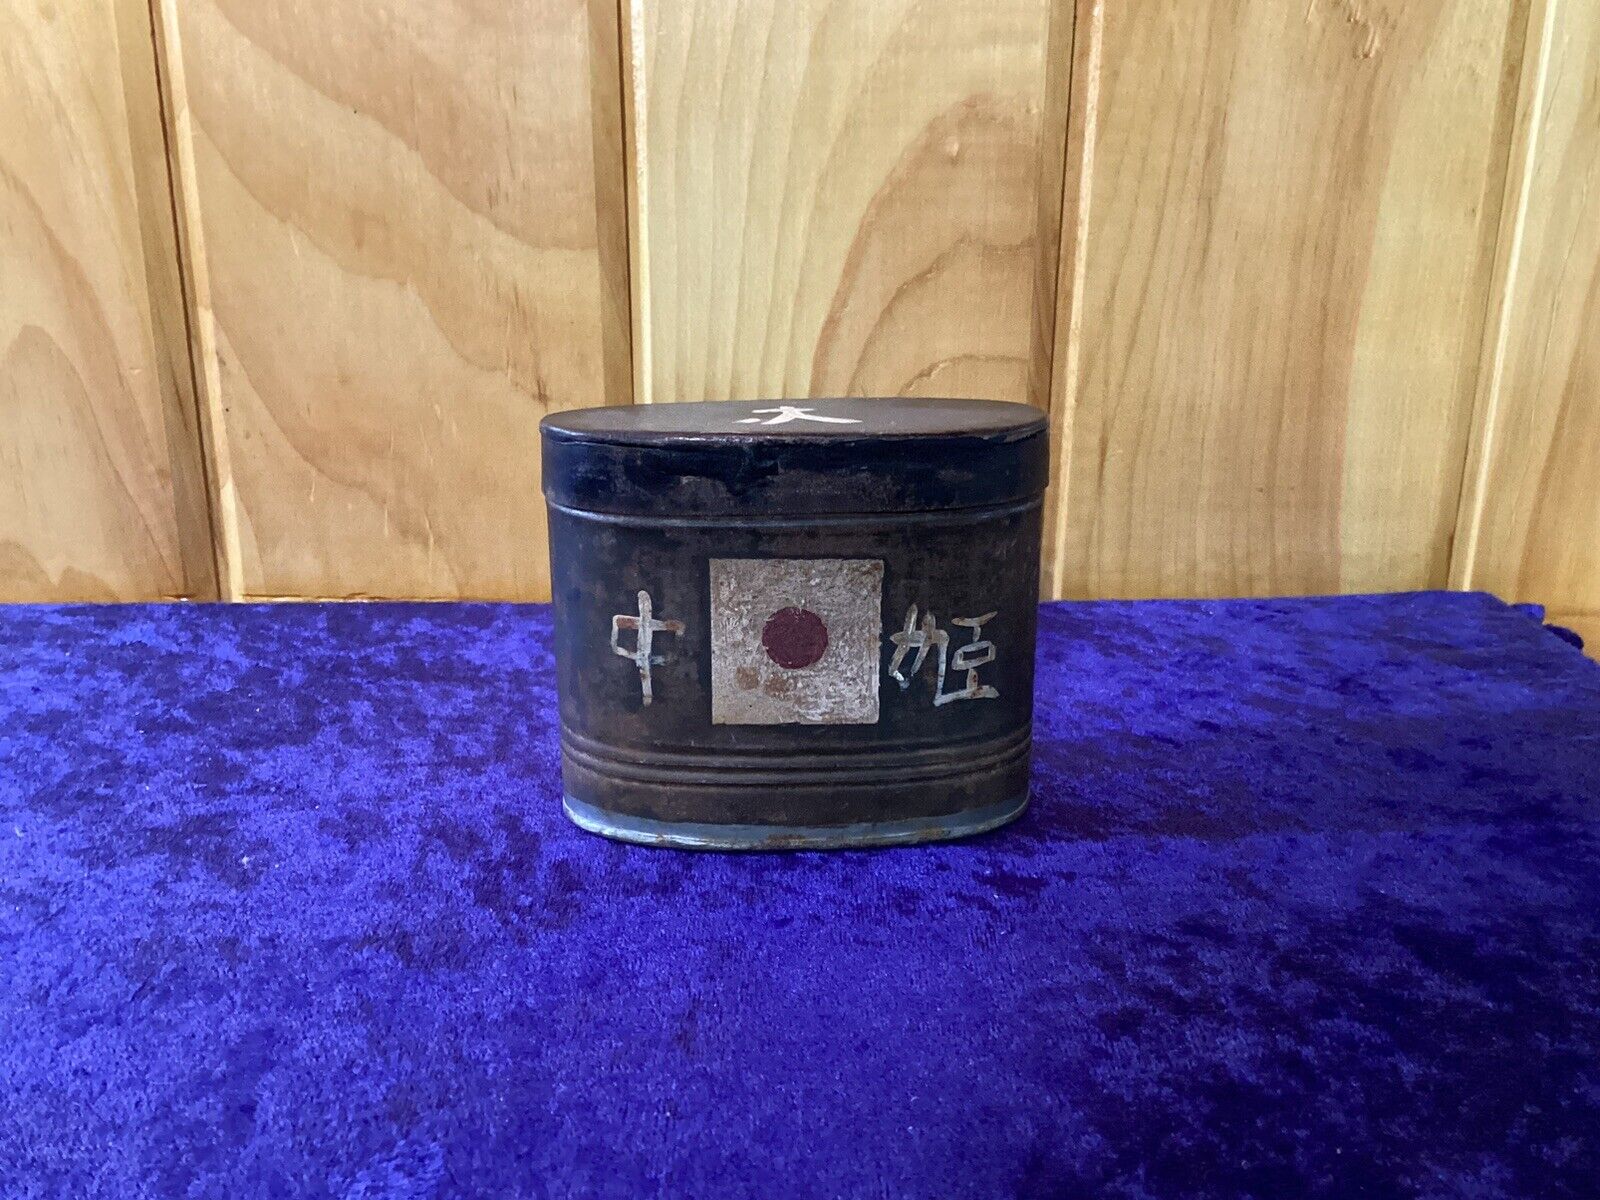 WW2 JAPANESE RATION CAN - WITH HAND PAINTED KANJI AND